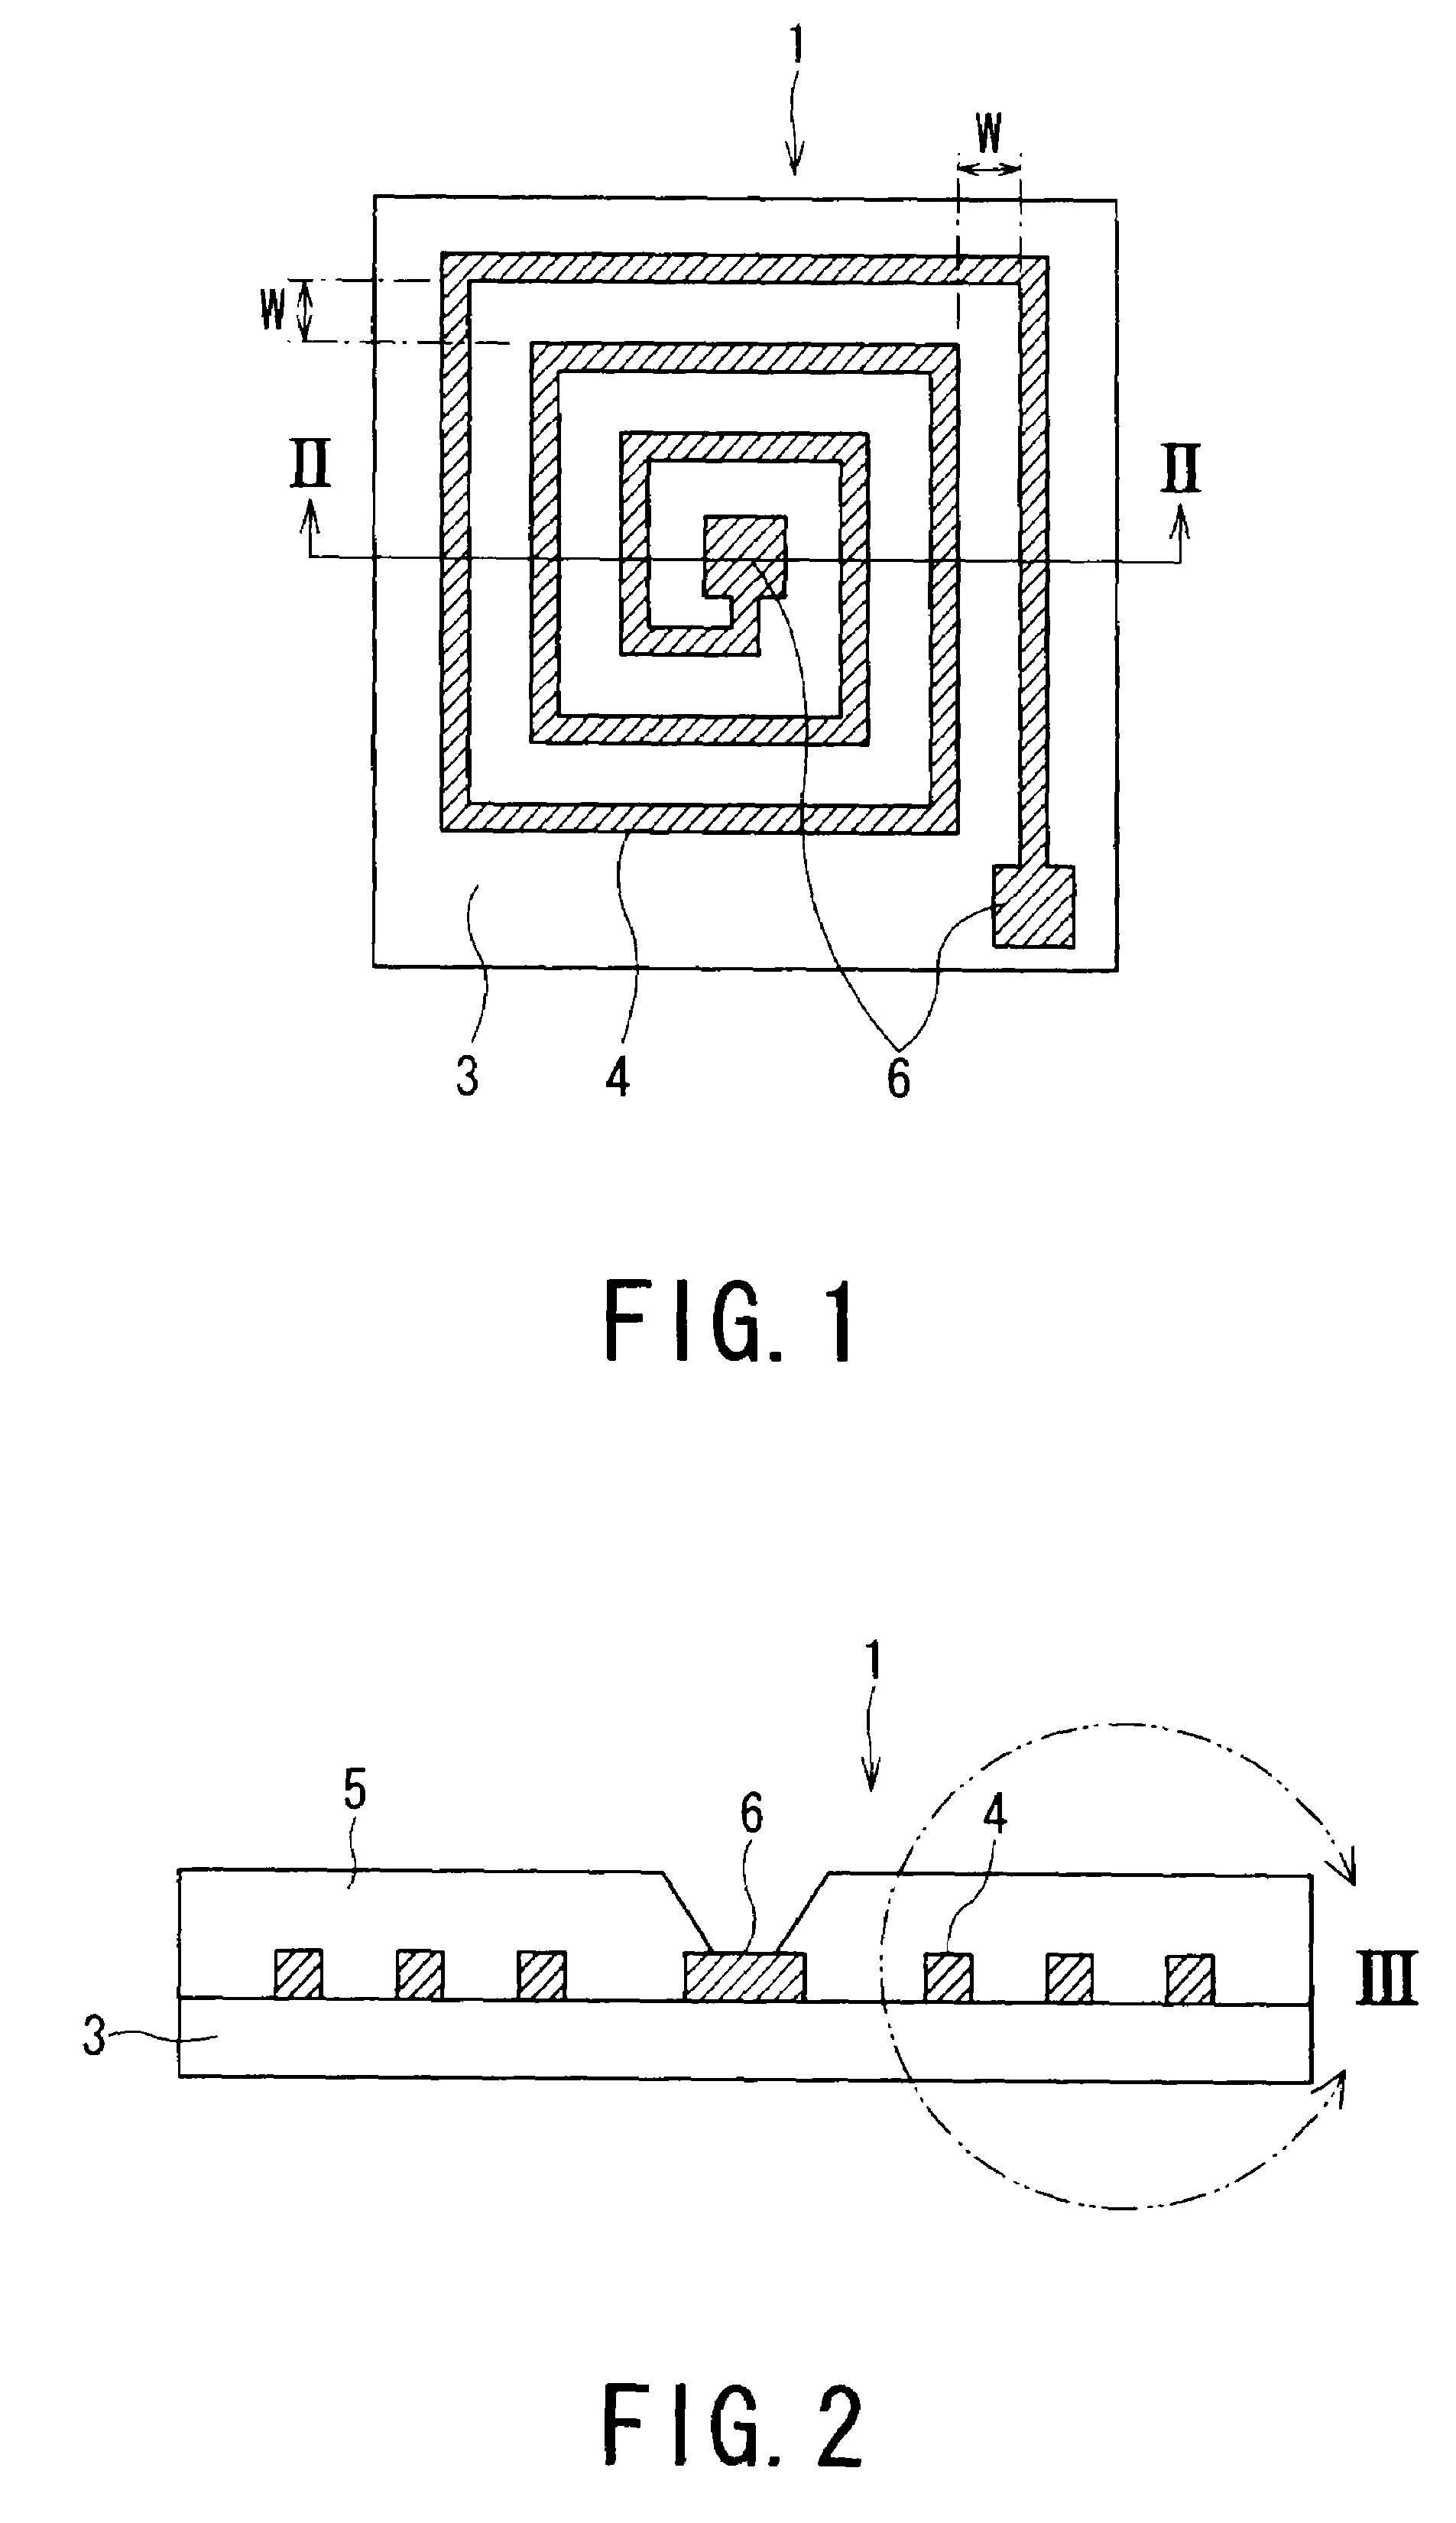 Flat magnetic element and power IC package using the same